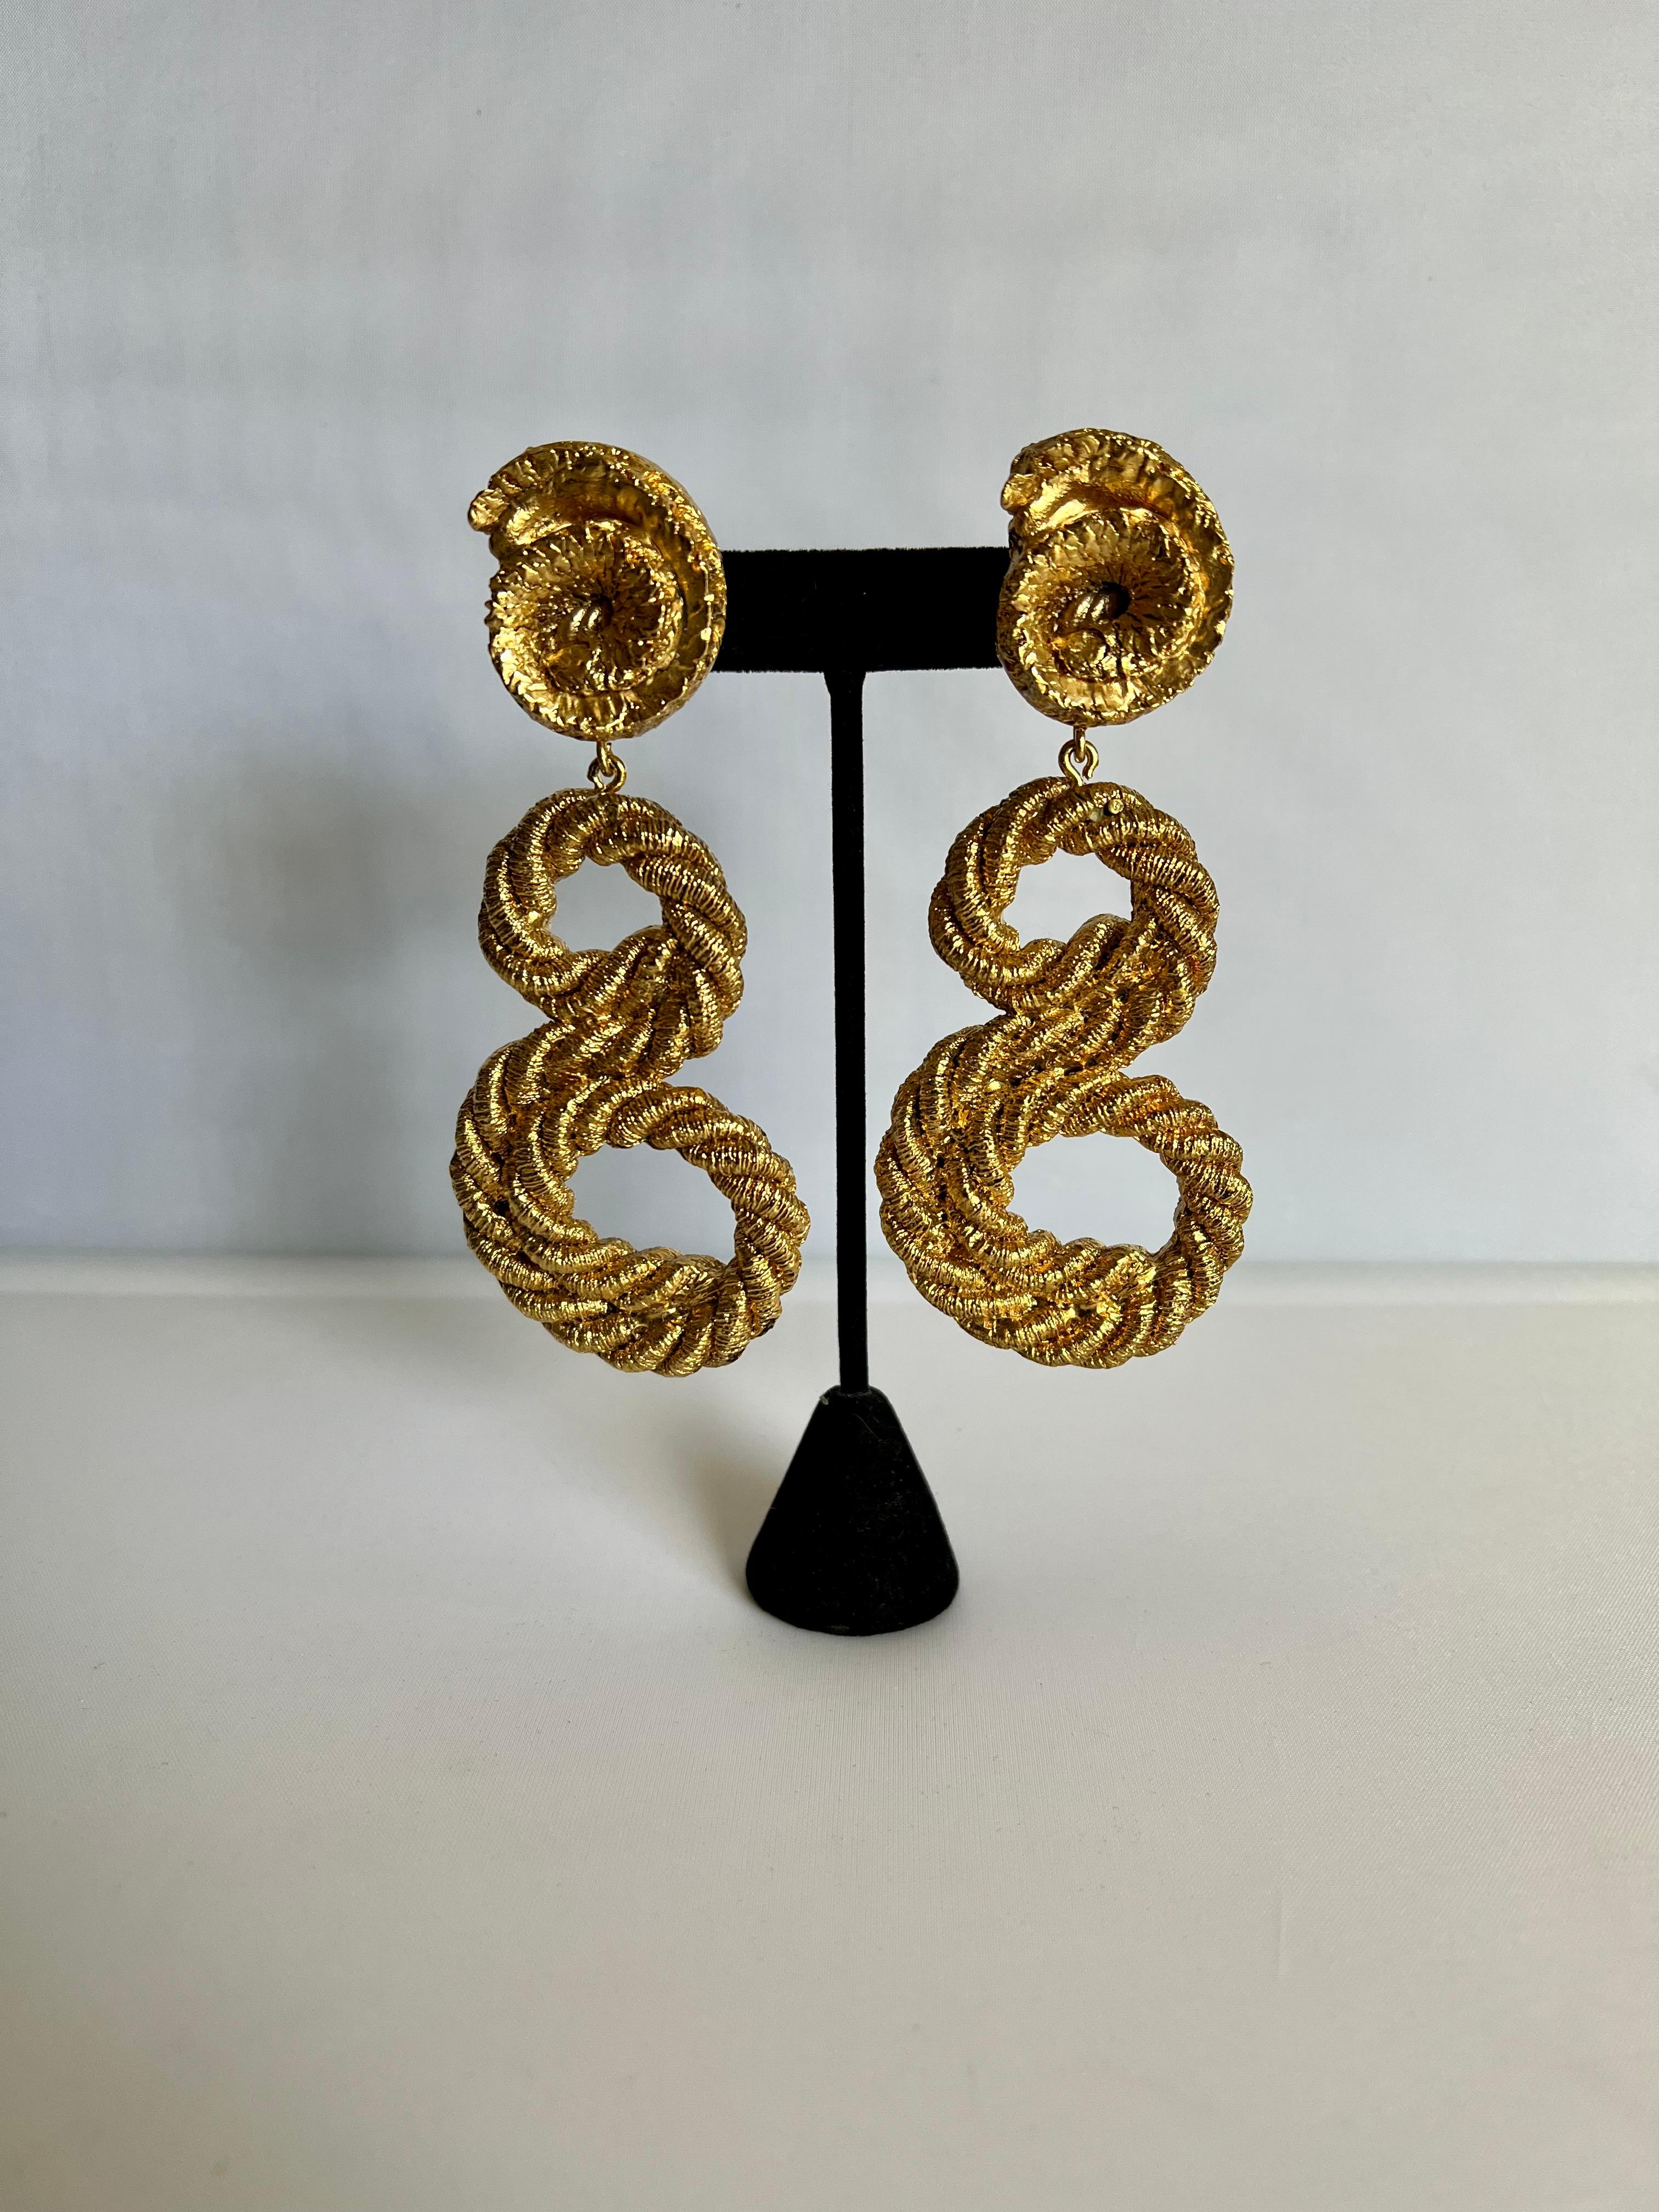 XL Vintage Knotted Rope Gold Swirl Earrings  In Excellent Condition For Sale In Palm Springs, CA